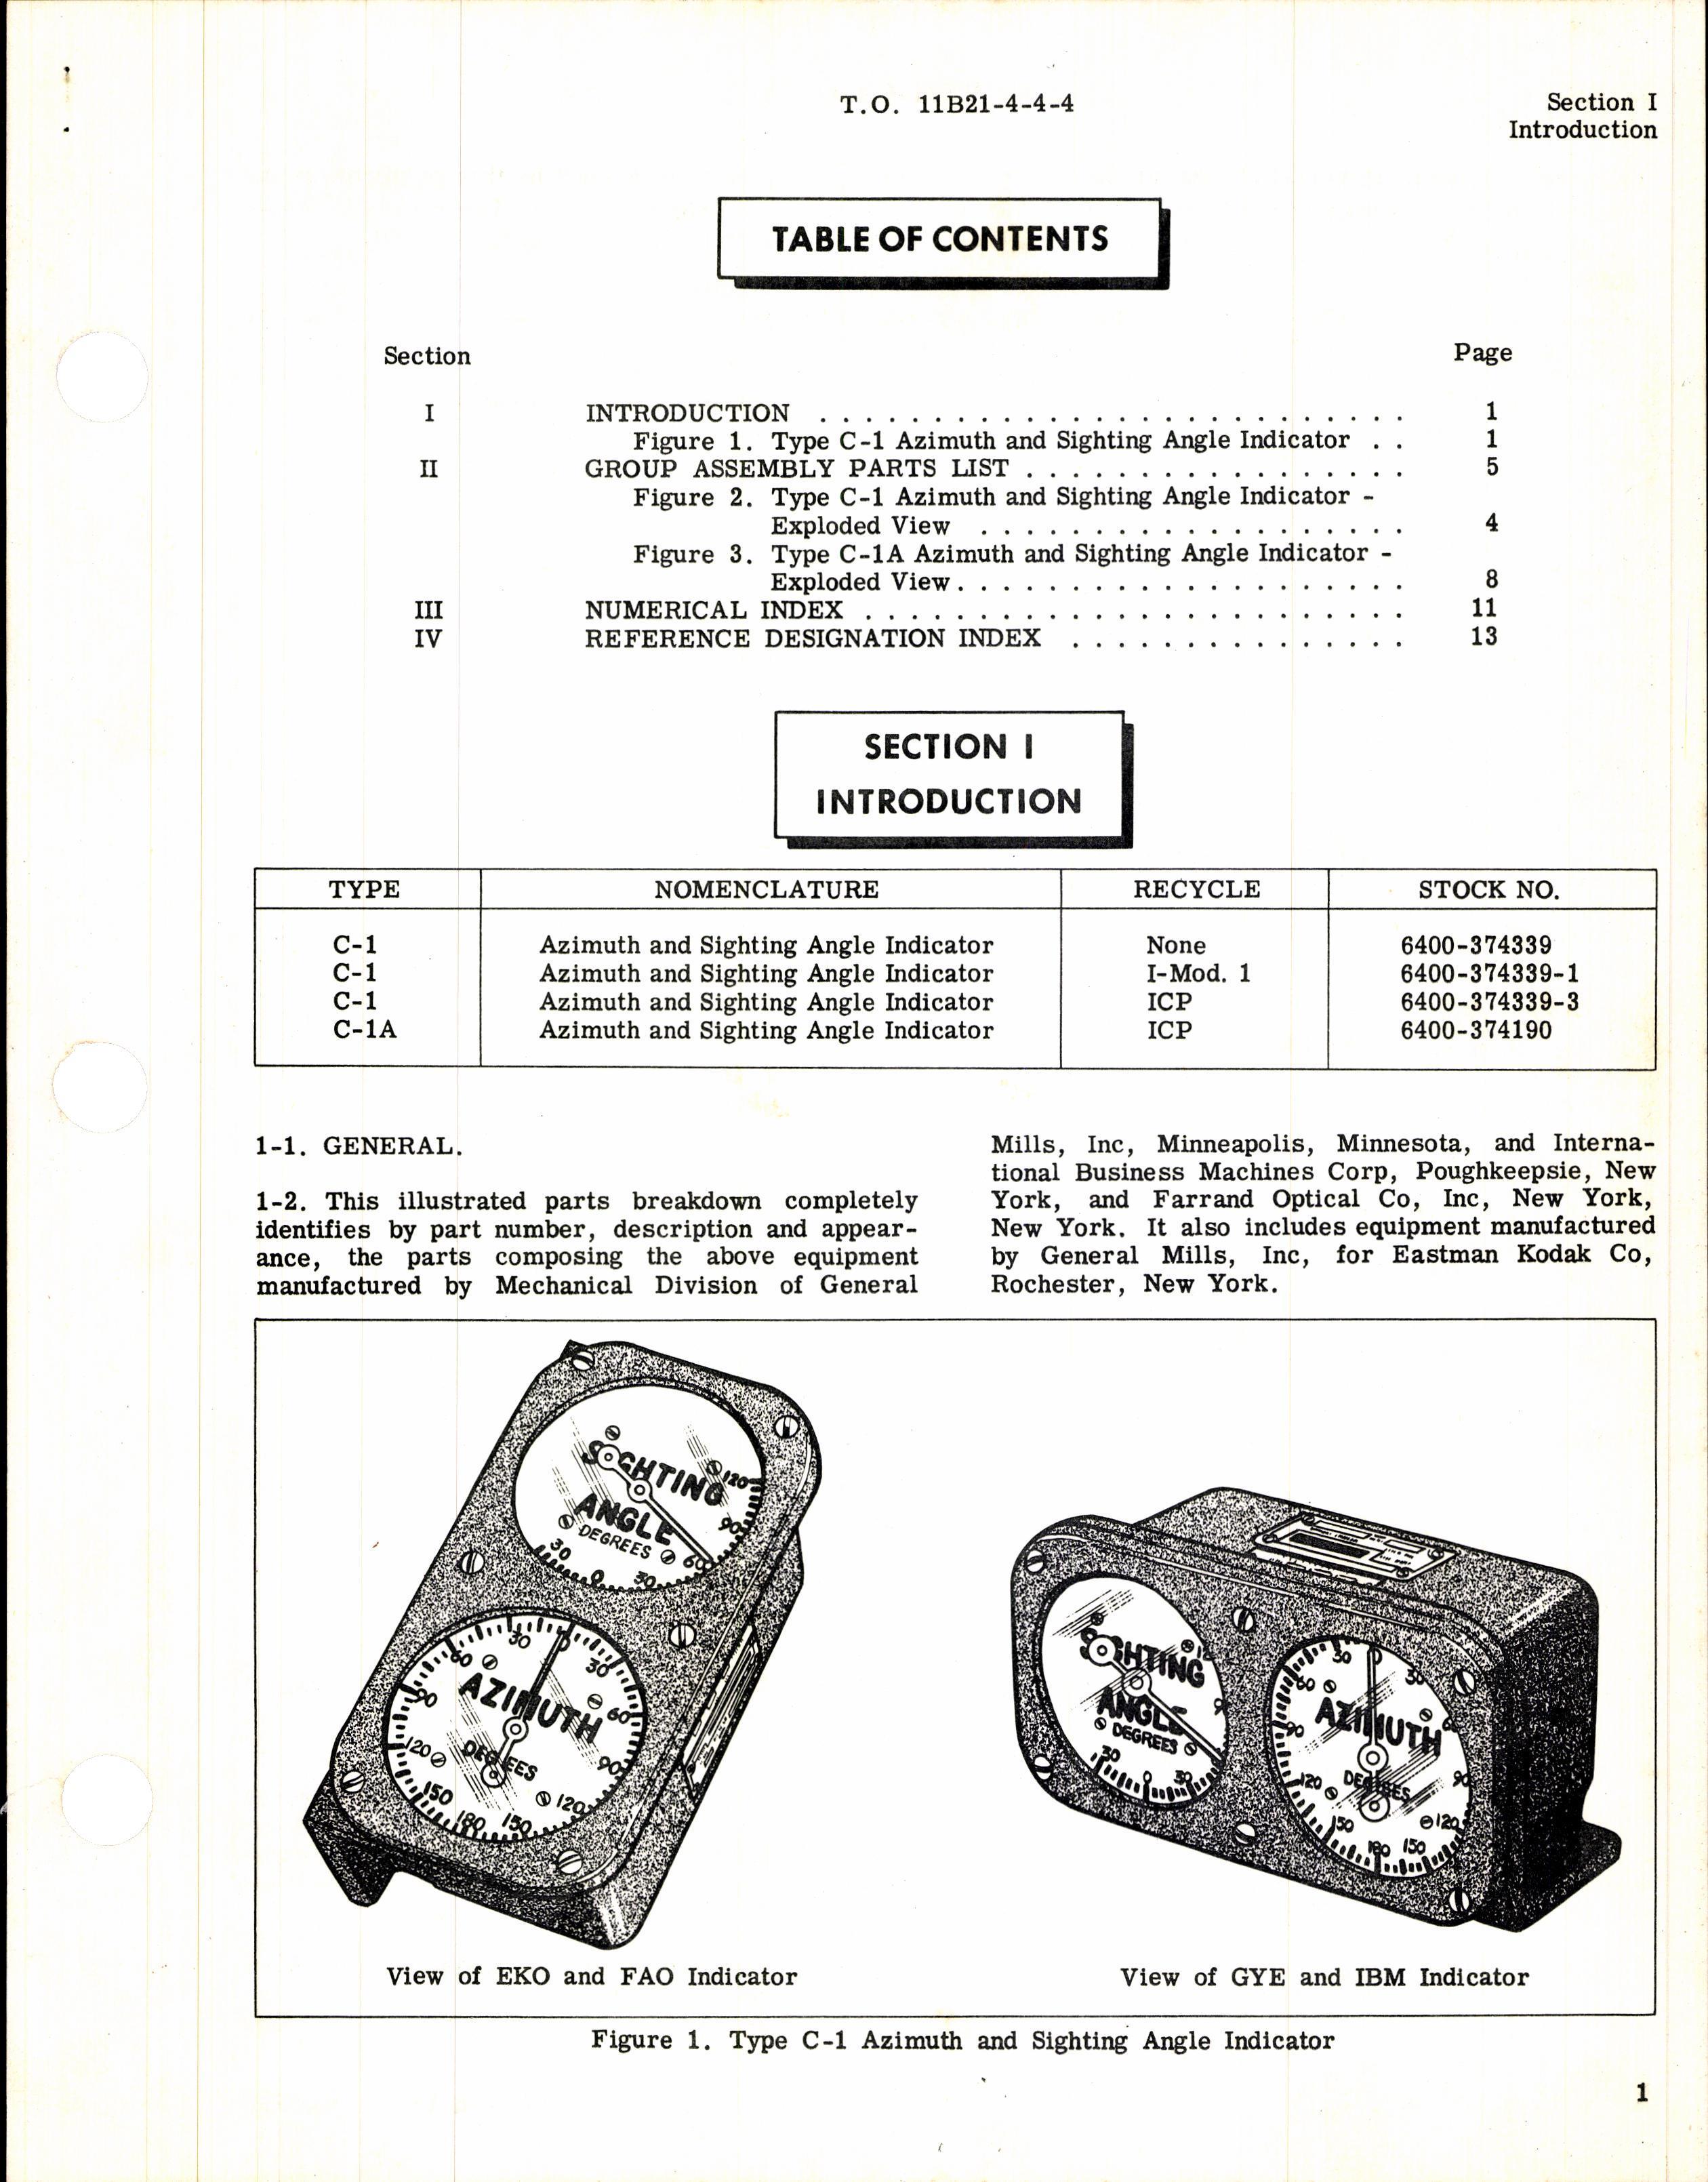 Sample page 3 from AirCorps Library document: Illustrated Parts Breakdown for General Mills Azimuth & Sighting Angle Indicator